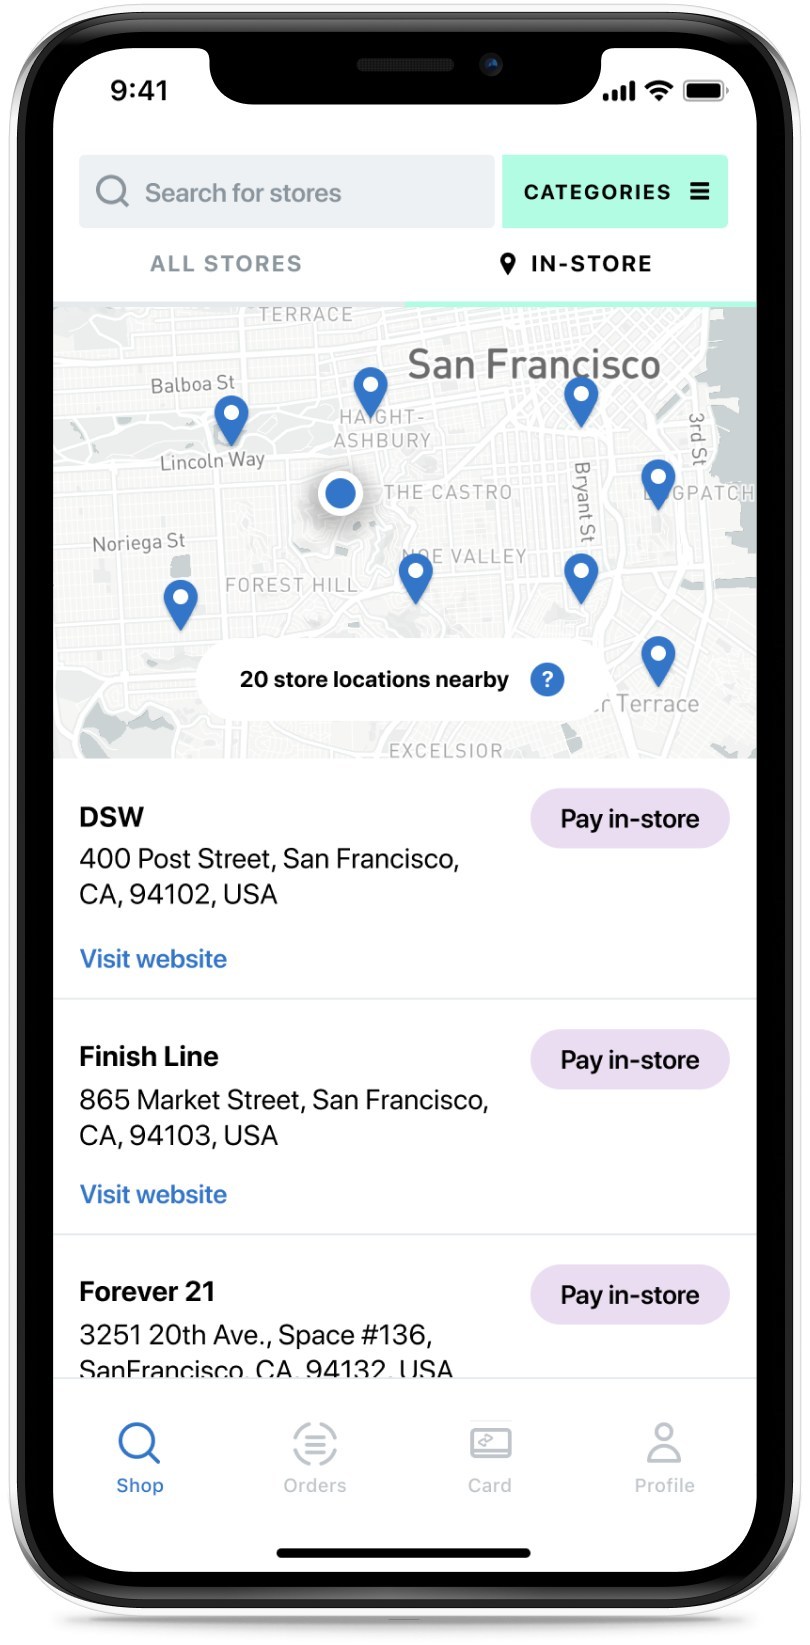 Afterpay Offers In-Store Payment Solution Across U.S. - Industry Resource